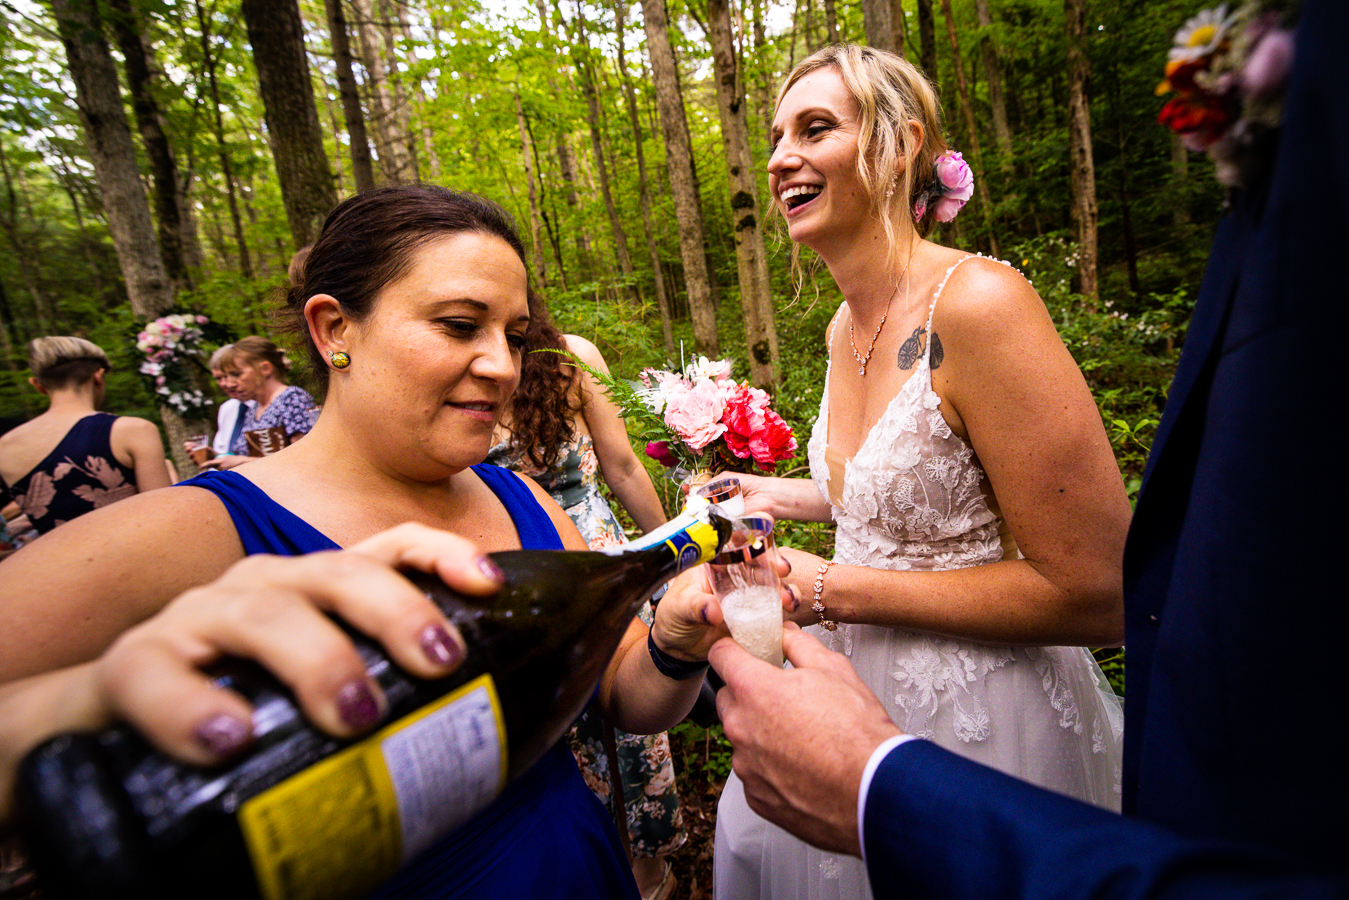 wedding photographer, lisa rhinehart, captures this image of friends pouring drinks for everyone after the wedding ceremony 